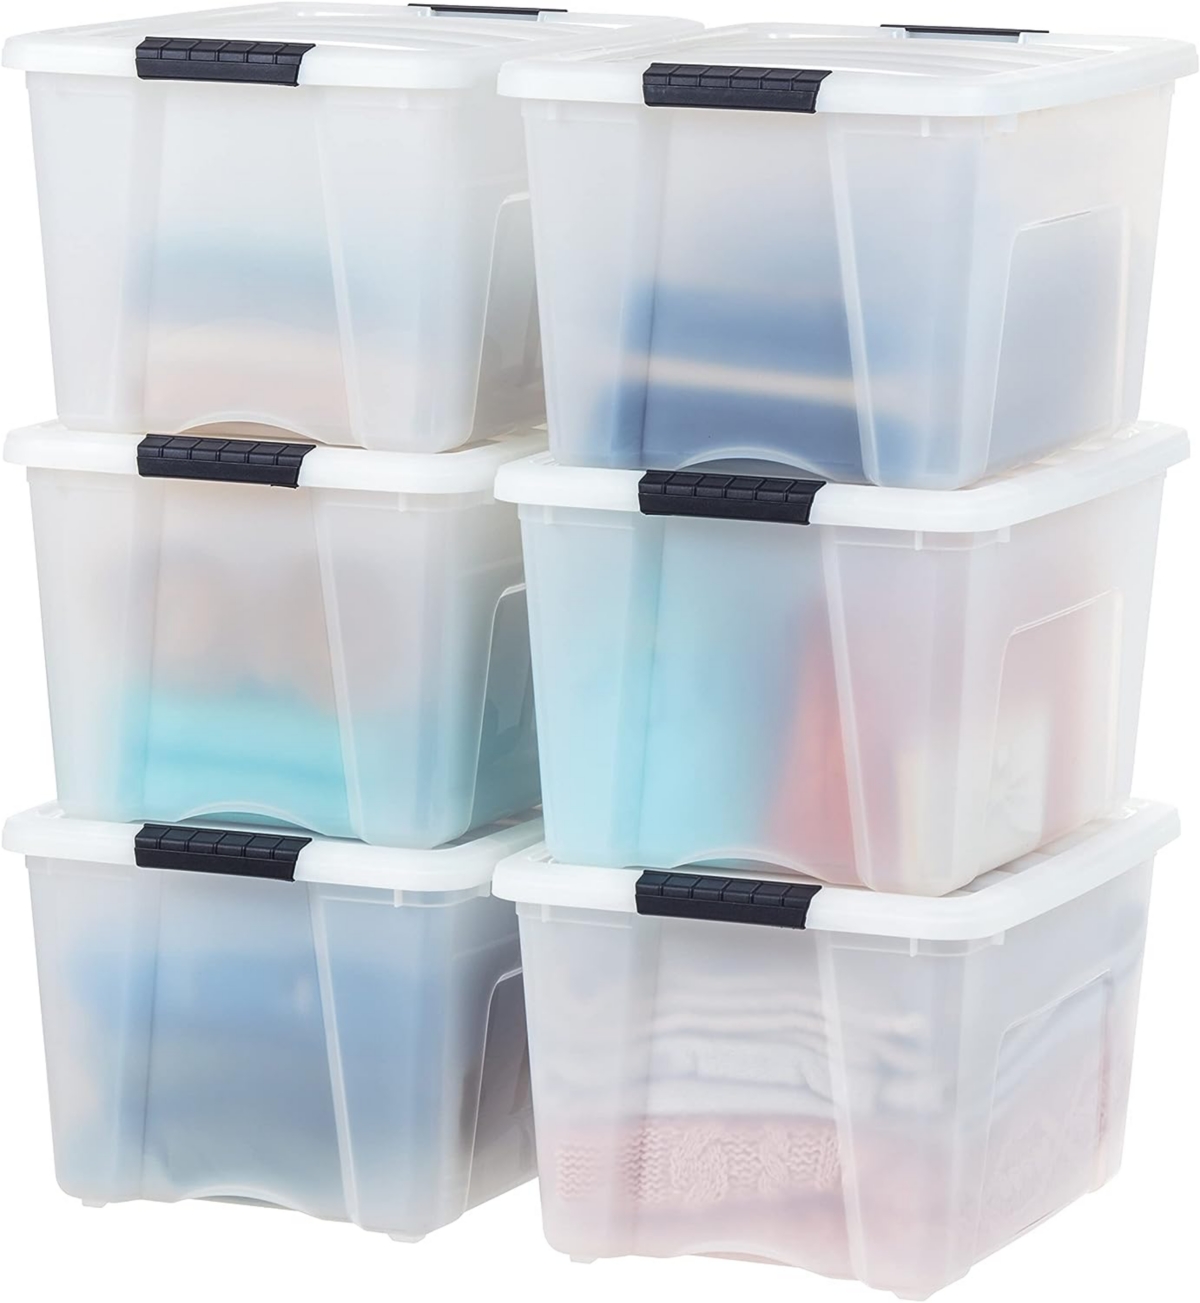 6 Pack 40qt Plastic Storage Bin with Lid and Secure Latching Buckles, Pearl